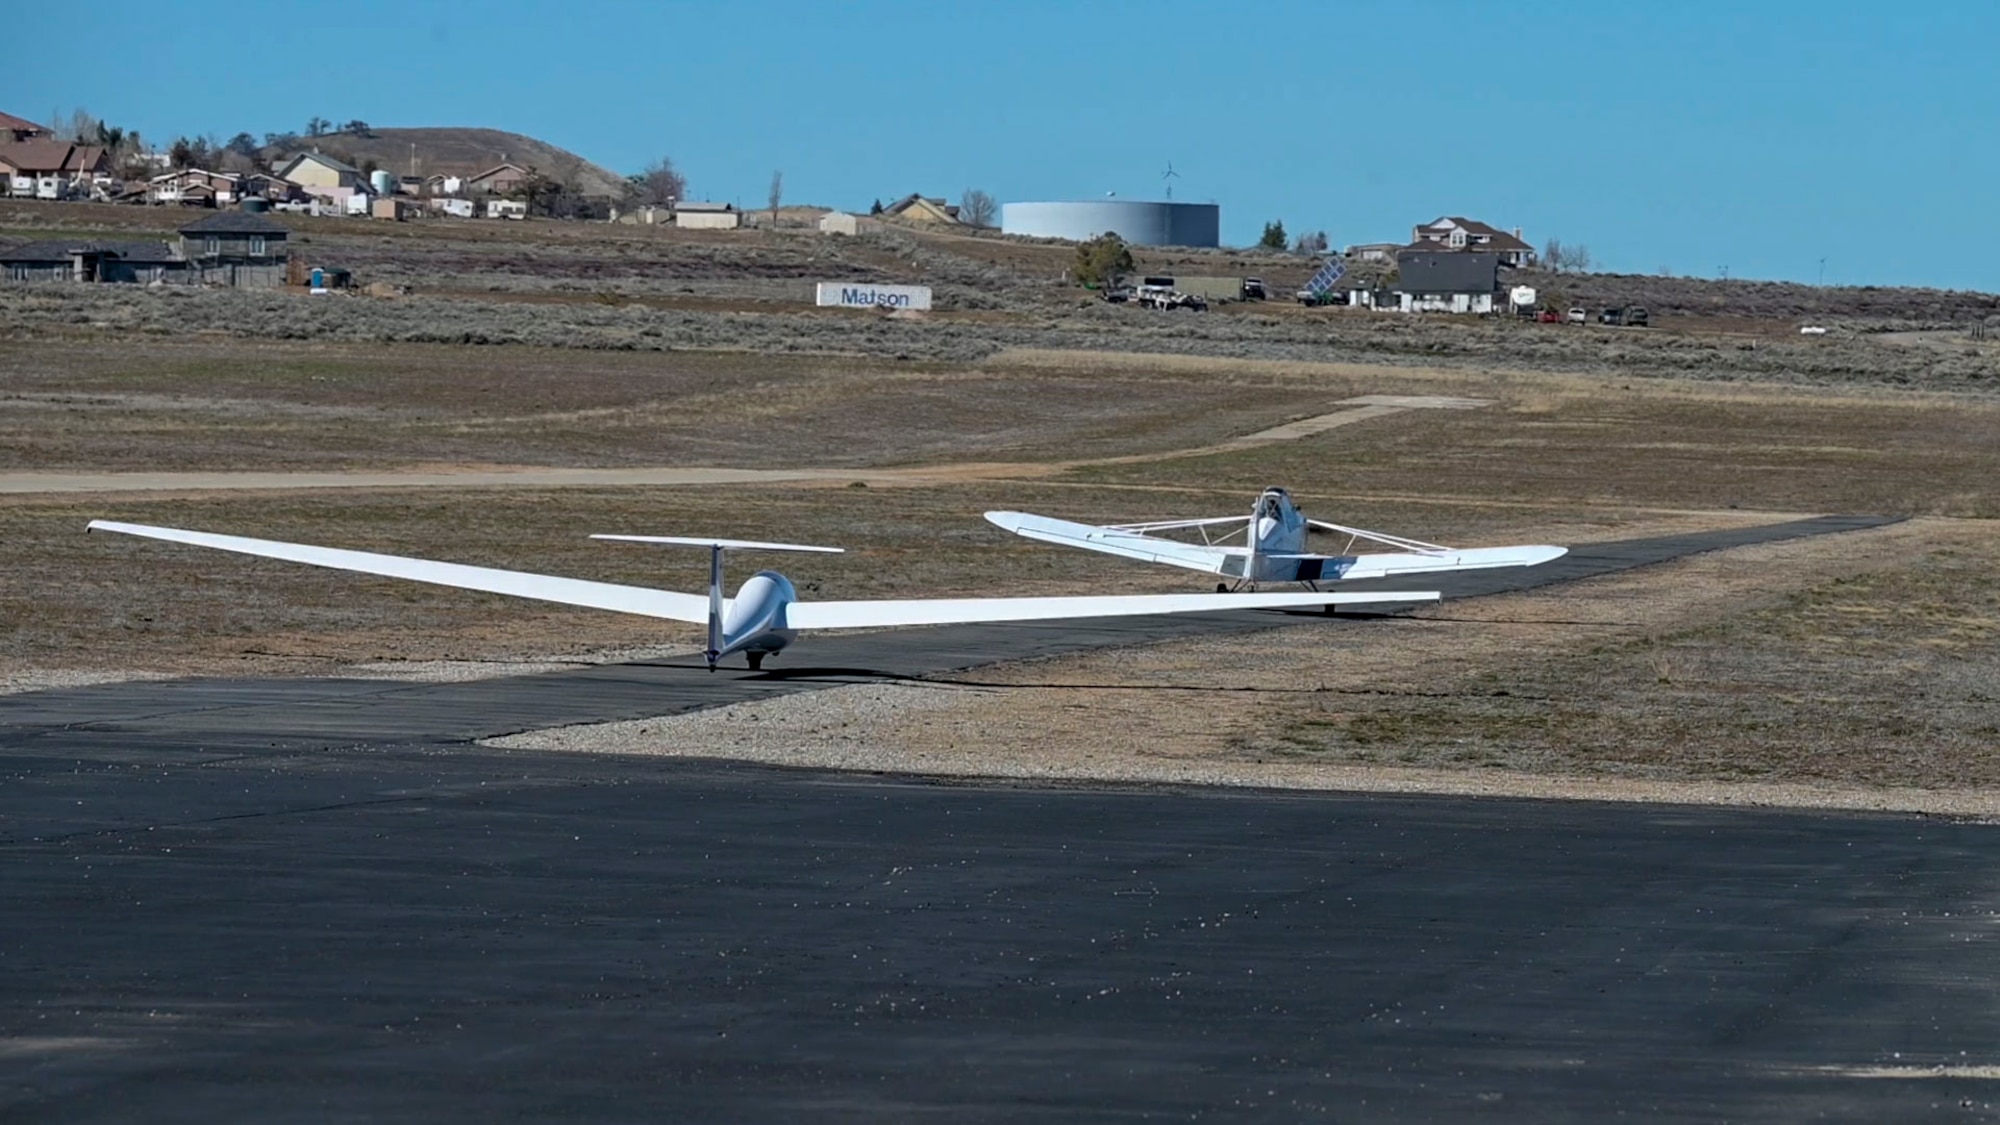 A student departs on a glider from Skylark North Glider School to begin the Space Test Course. To celebrate National Engineering Week, the United States Air Force Test Pilot School based at Edwards Air Force Base went to Tehachapi, California to fly mountain gliders to simulate space shuttle approaches.